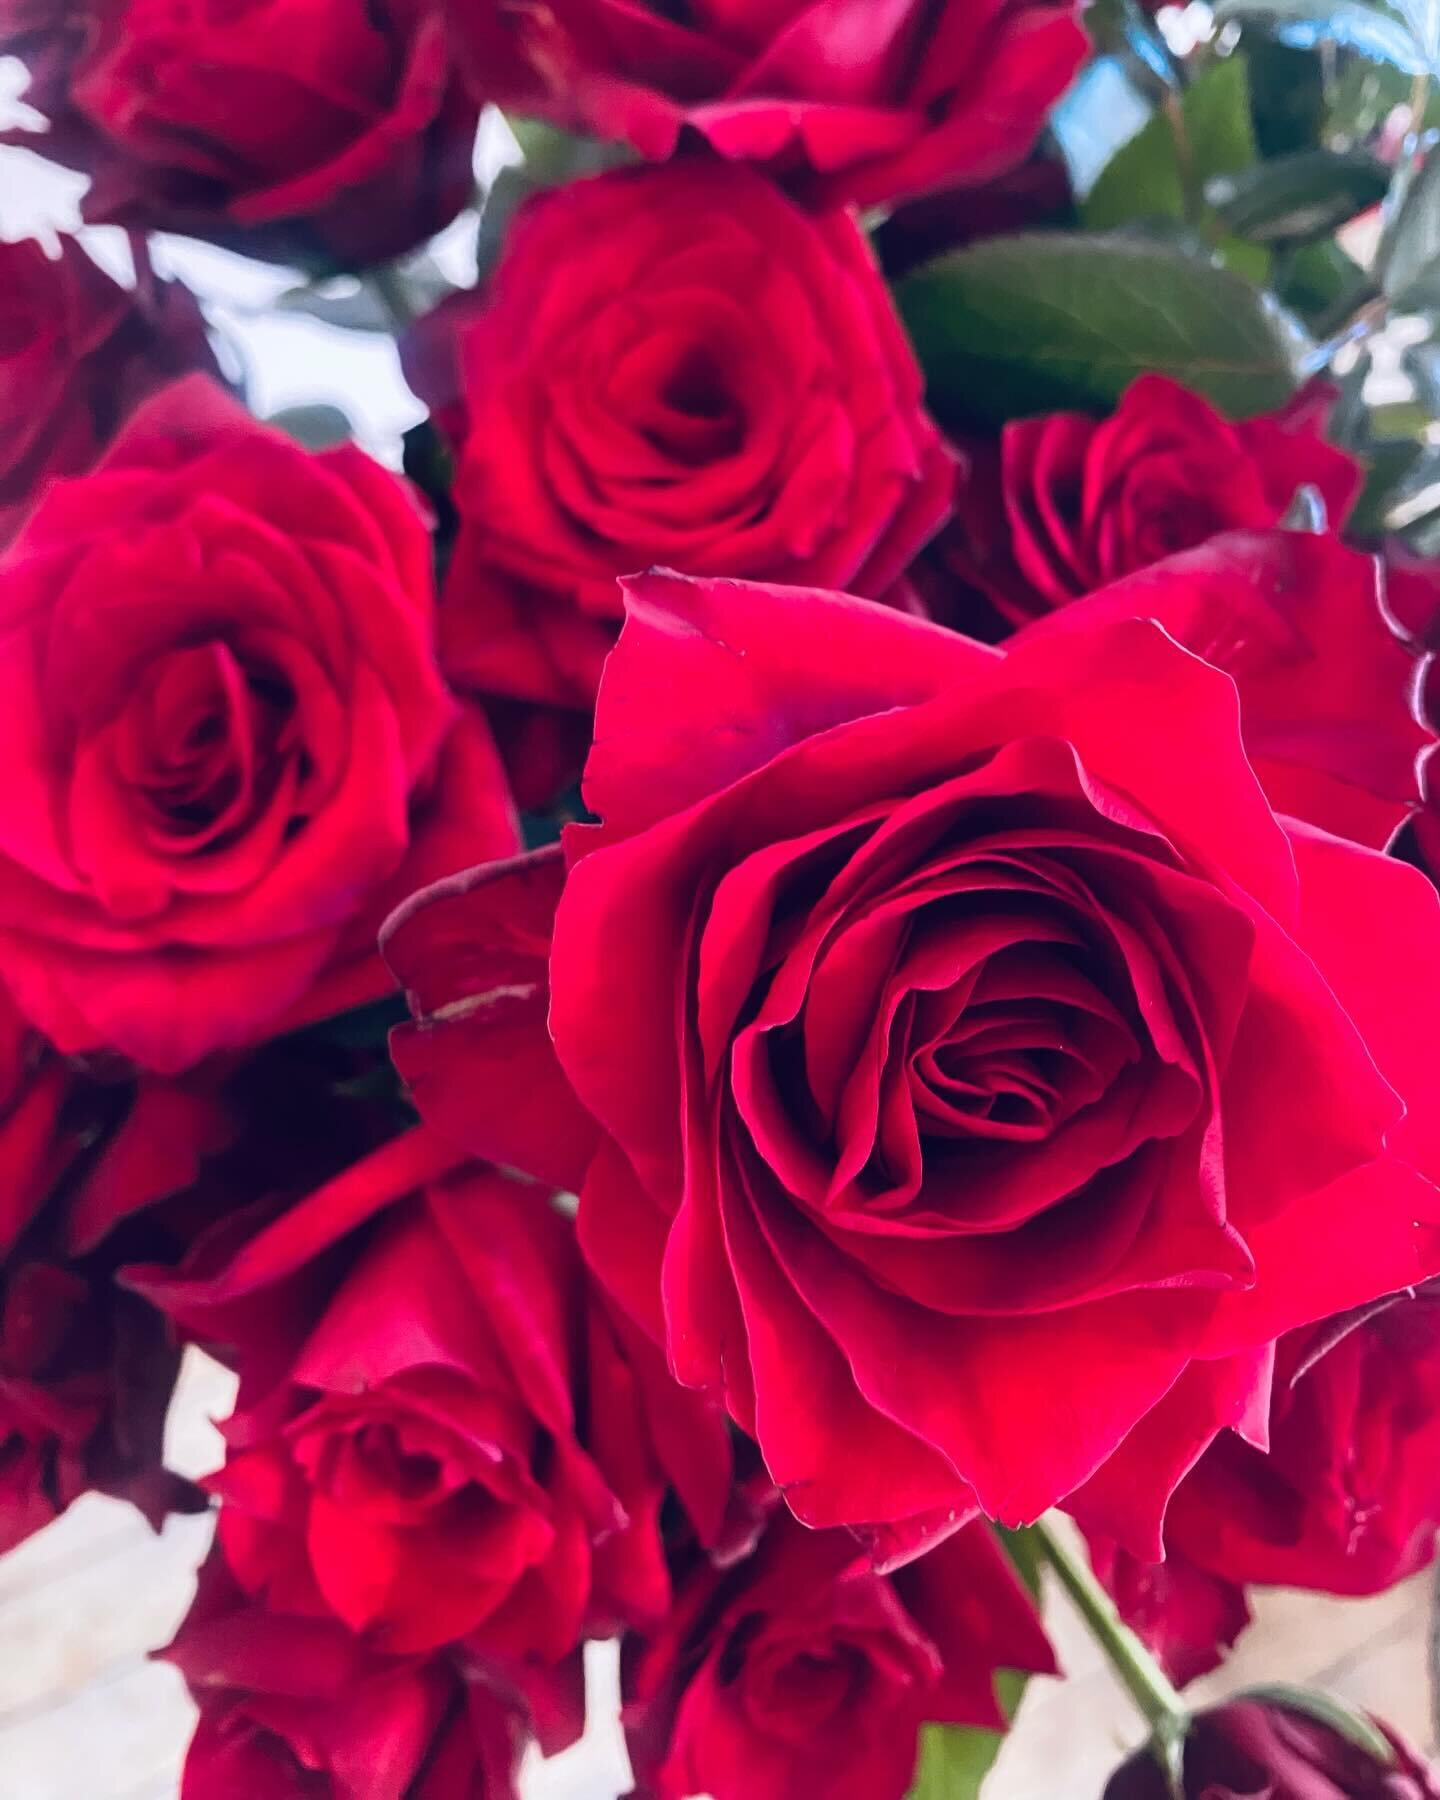 ROSES say &ldquo;I Love You&rdquo; 
Red means a deep passionate &amp; romantic love.
The perfect symbol for Valentine&rsquo;s Day.
🌹

#roses #valentines #feb14 #iloveyou #lovers